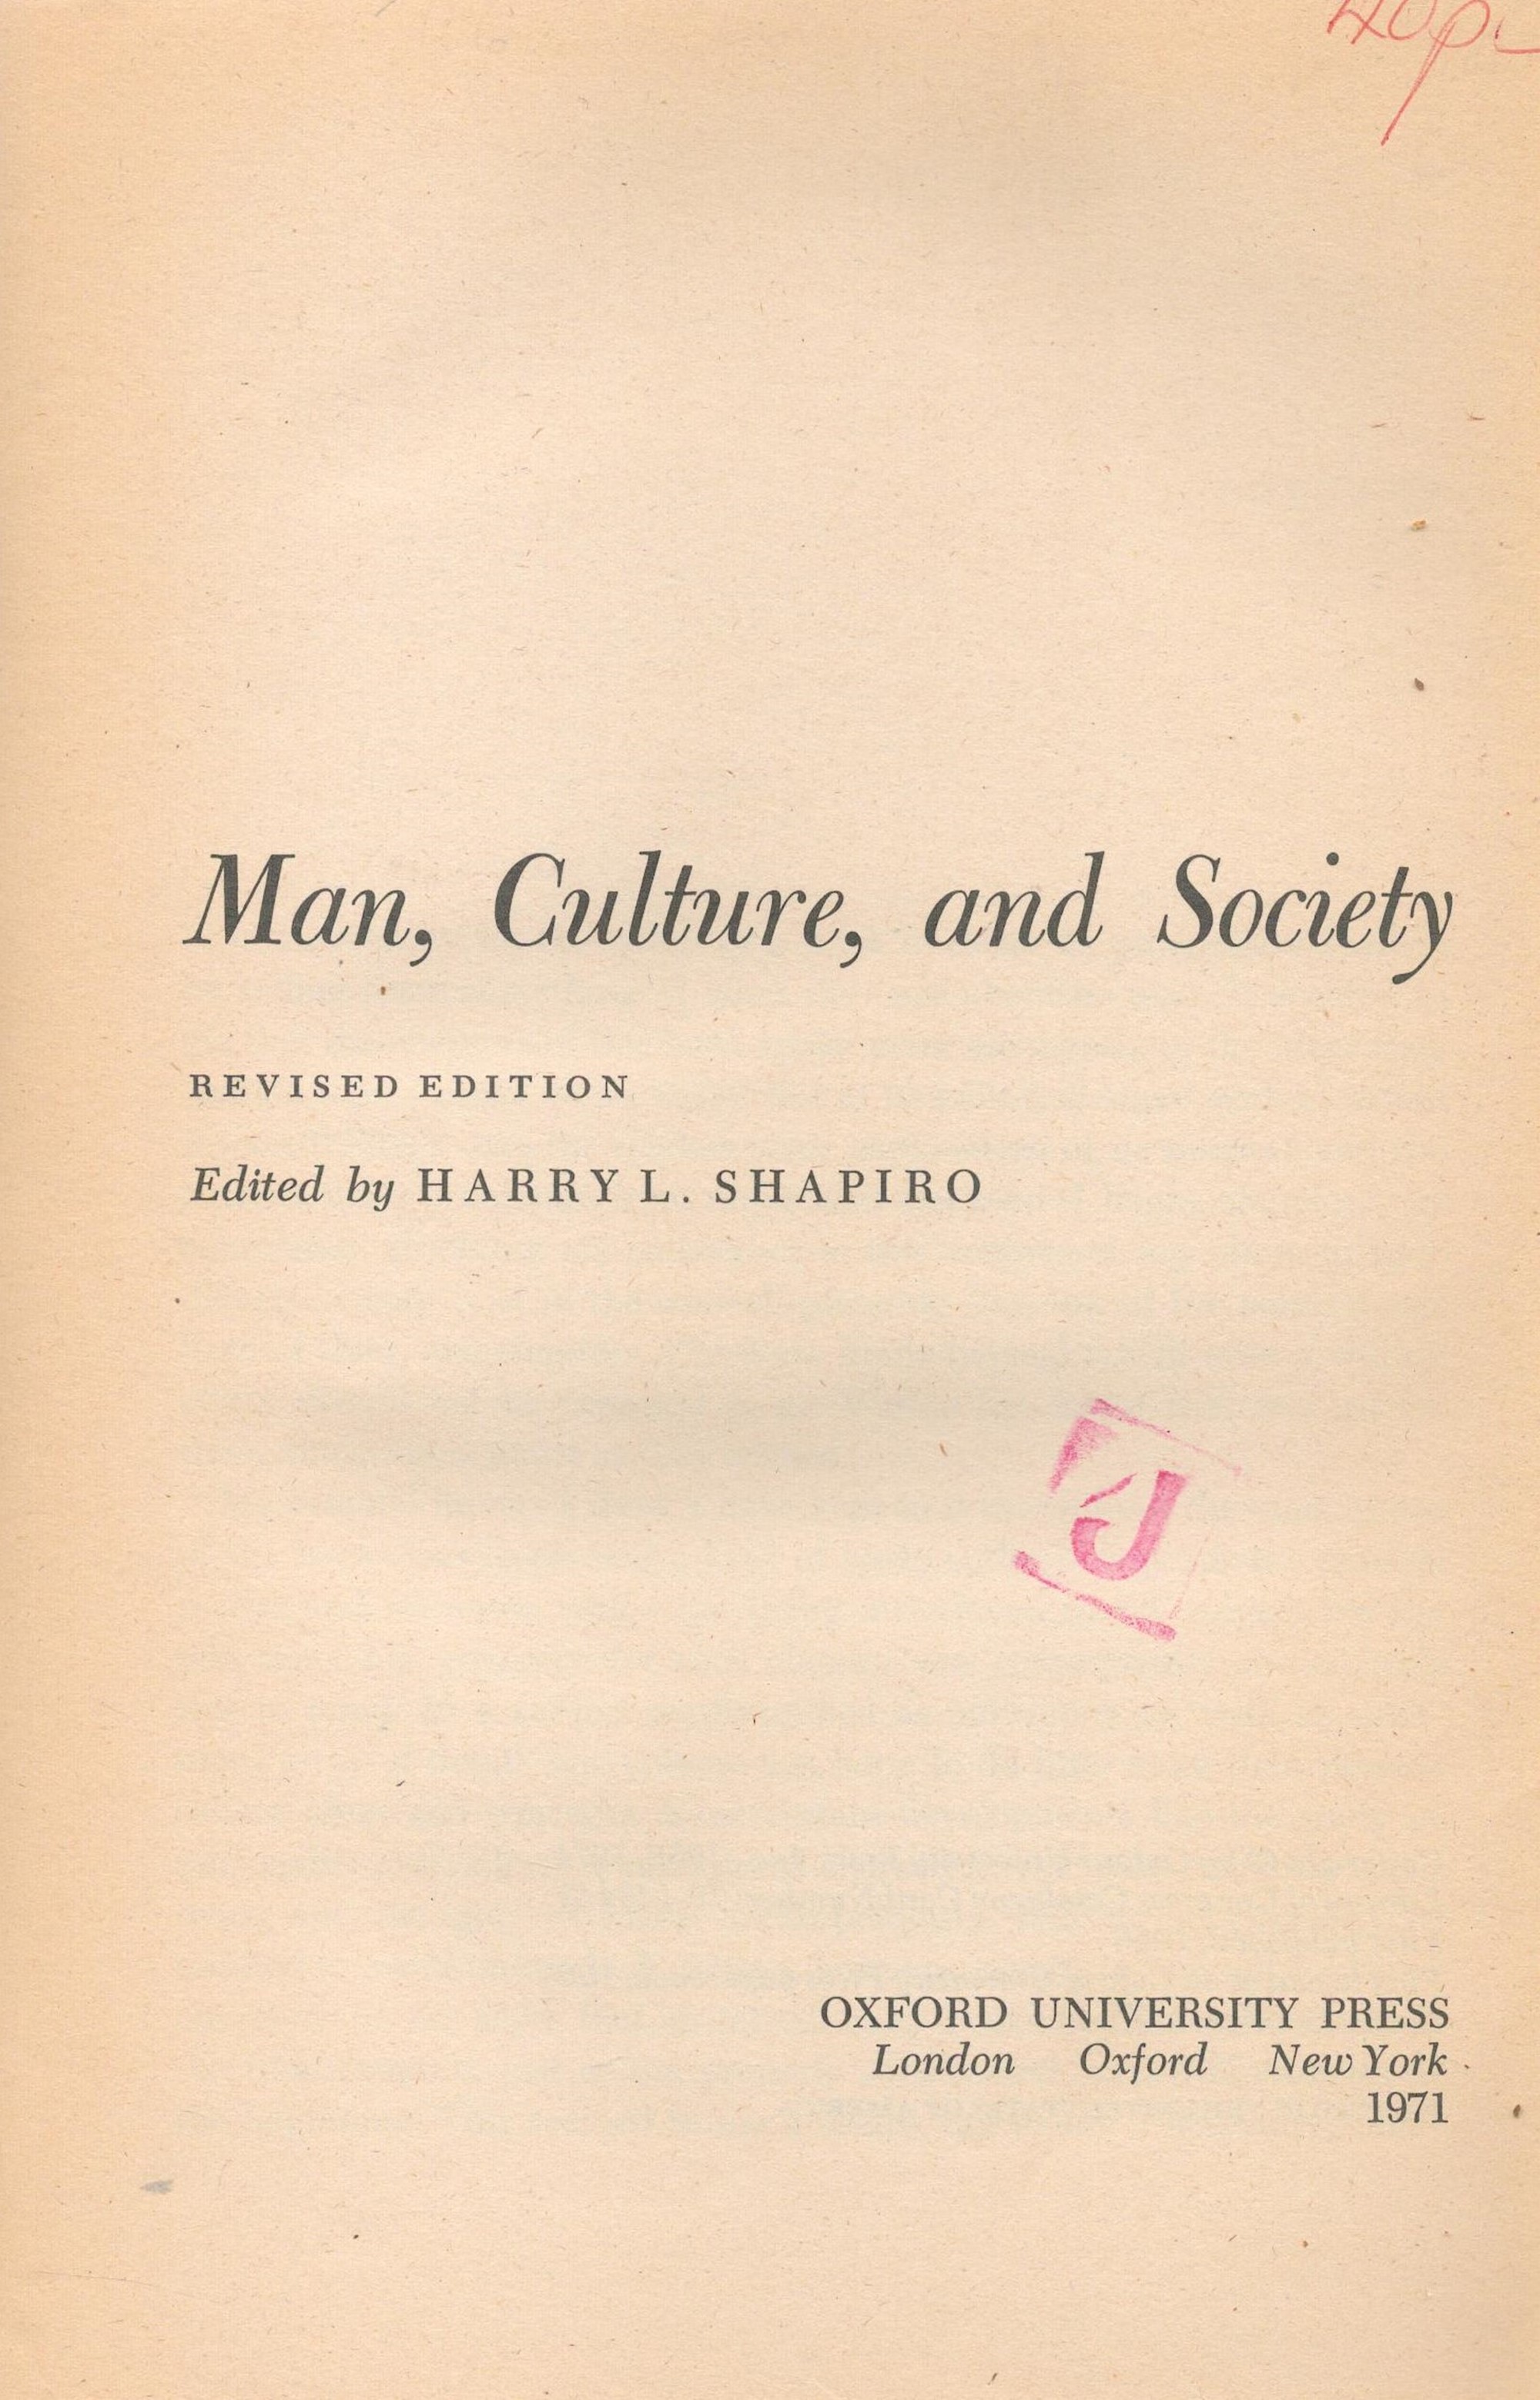 Man, Culture, and Society edited by Harry L Shapiro Softback Book 1971 Revised Edition published - Image 3 of 6